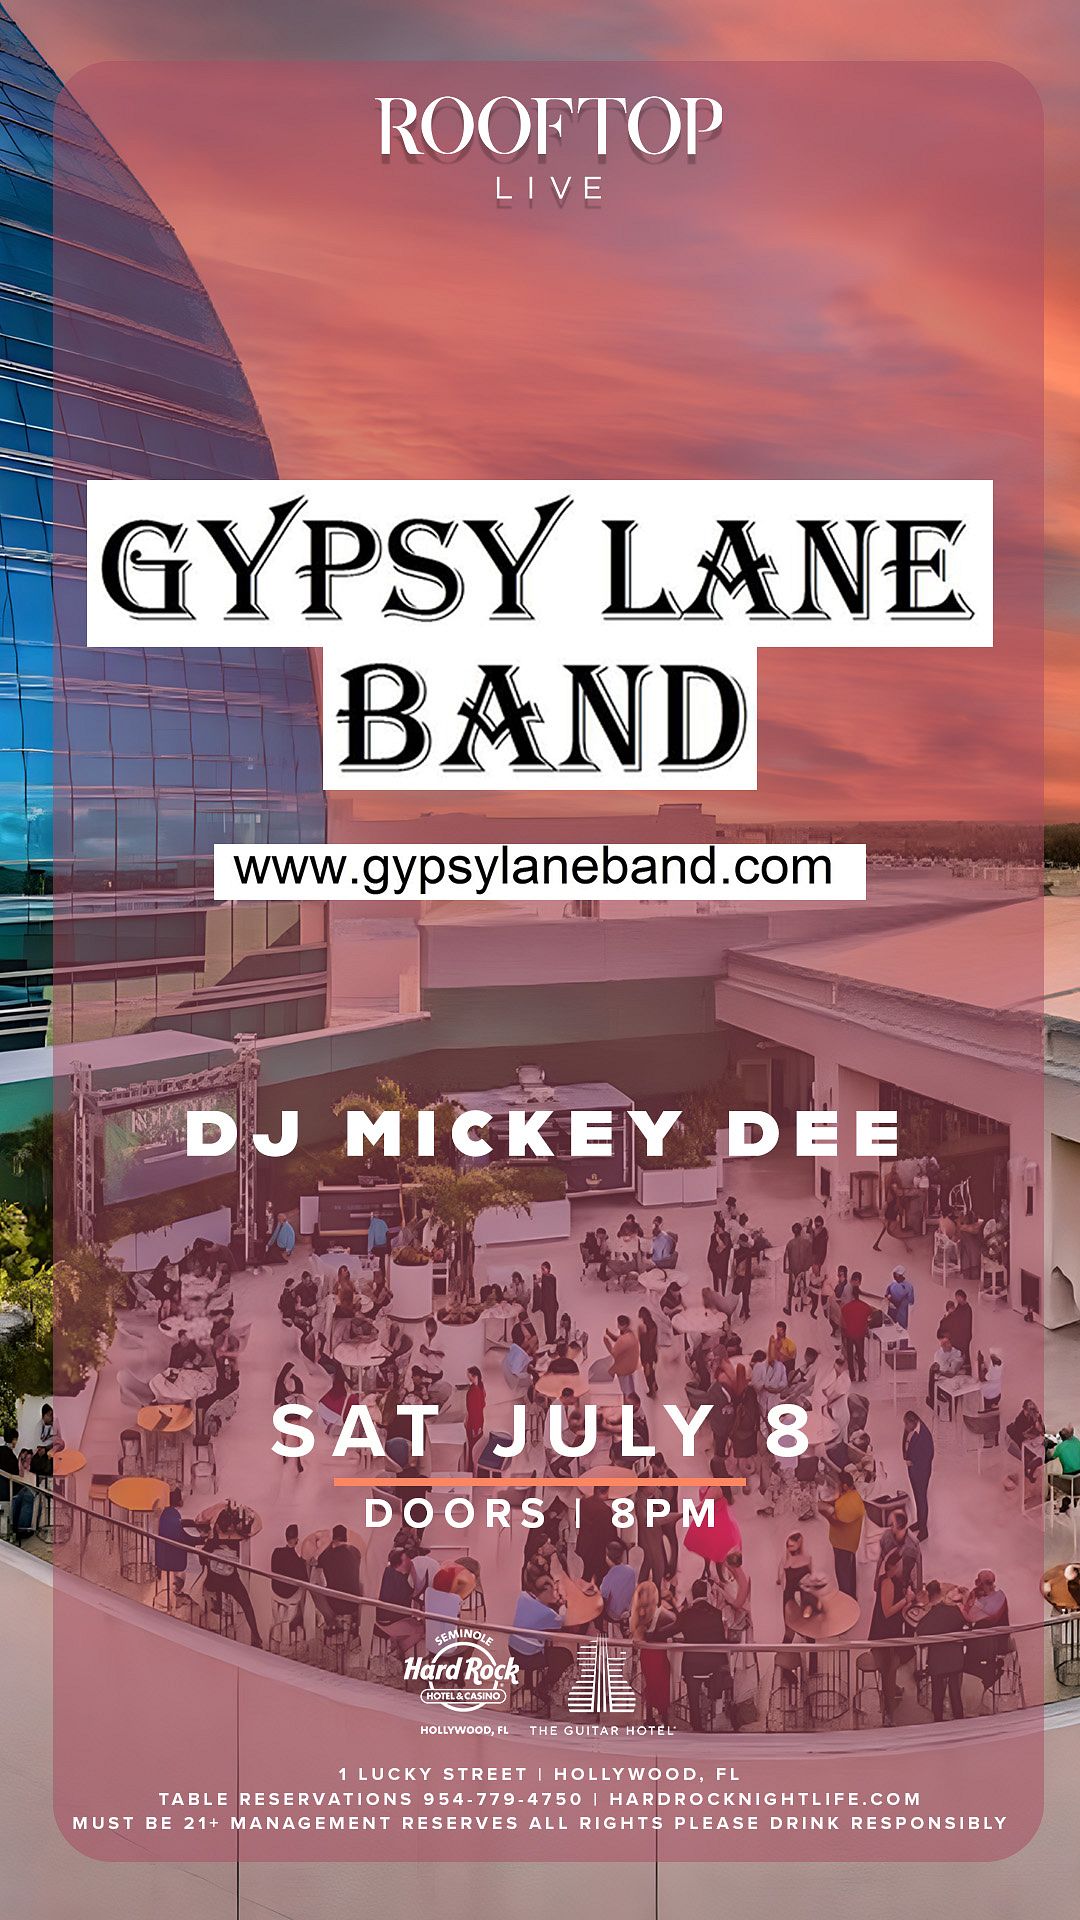 Gypsy Lane Band Rooftop Live Tickets at Rooftop Live in Hollywood by